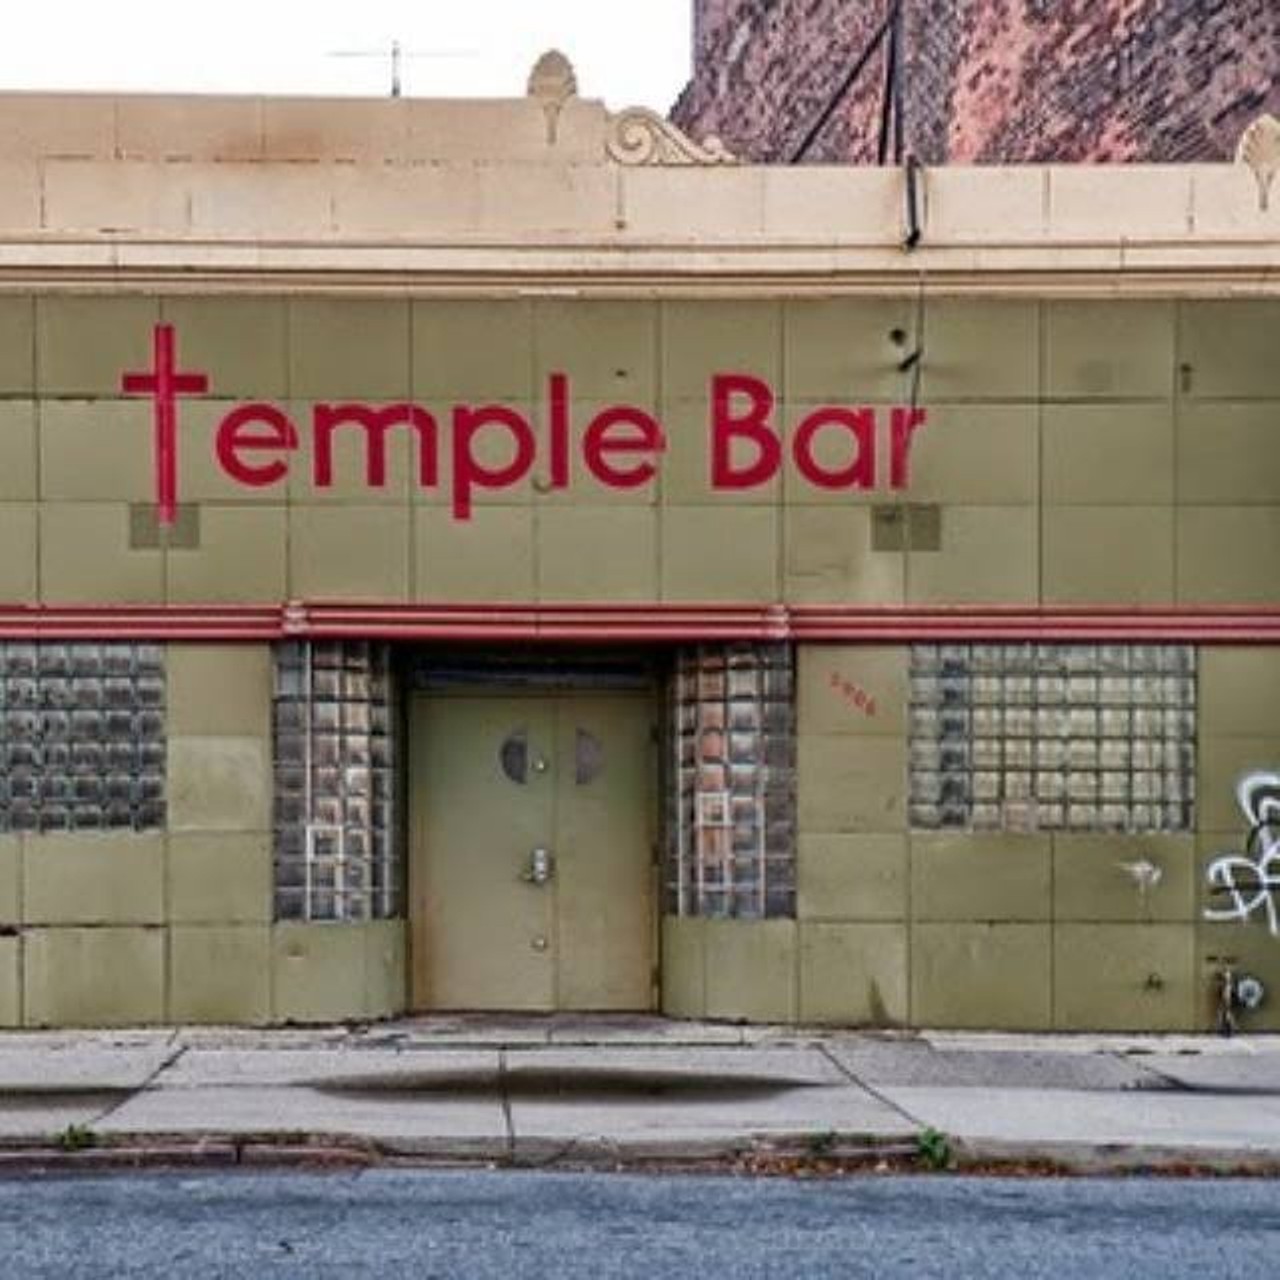 Temple Bar -
Food and snacks will be served. No cover.
2906 Cass Ave., Detroit; 313-832-2822; Photo